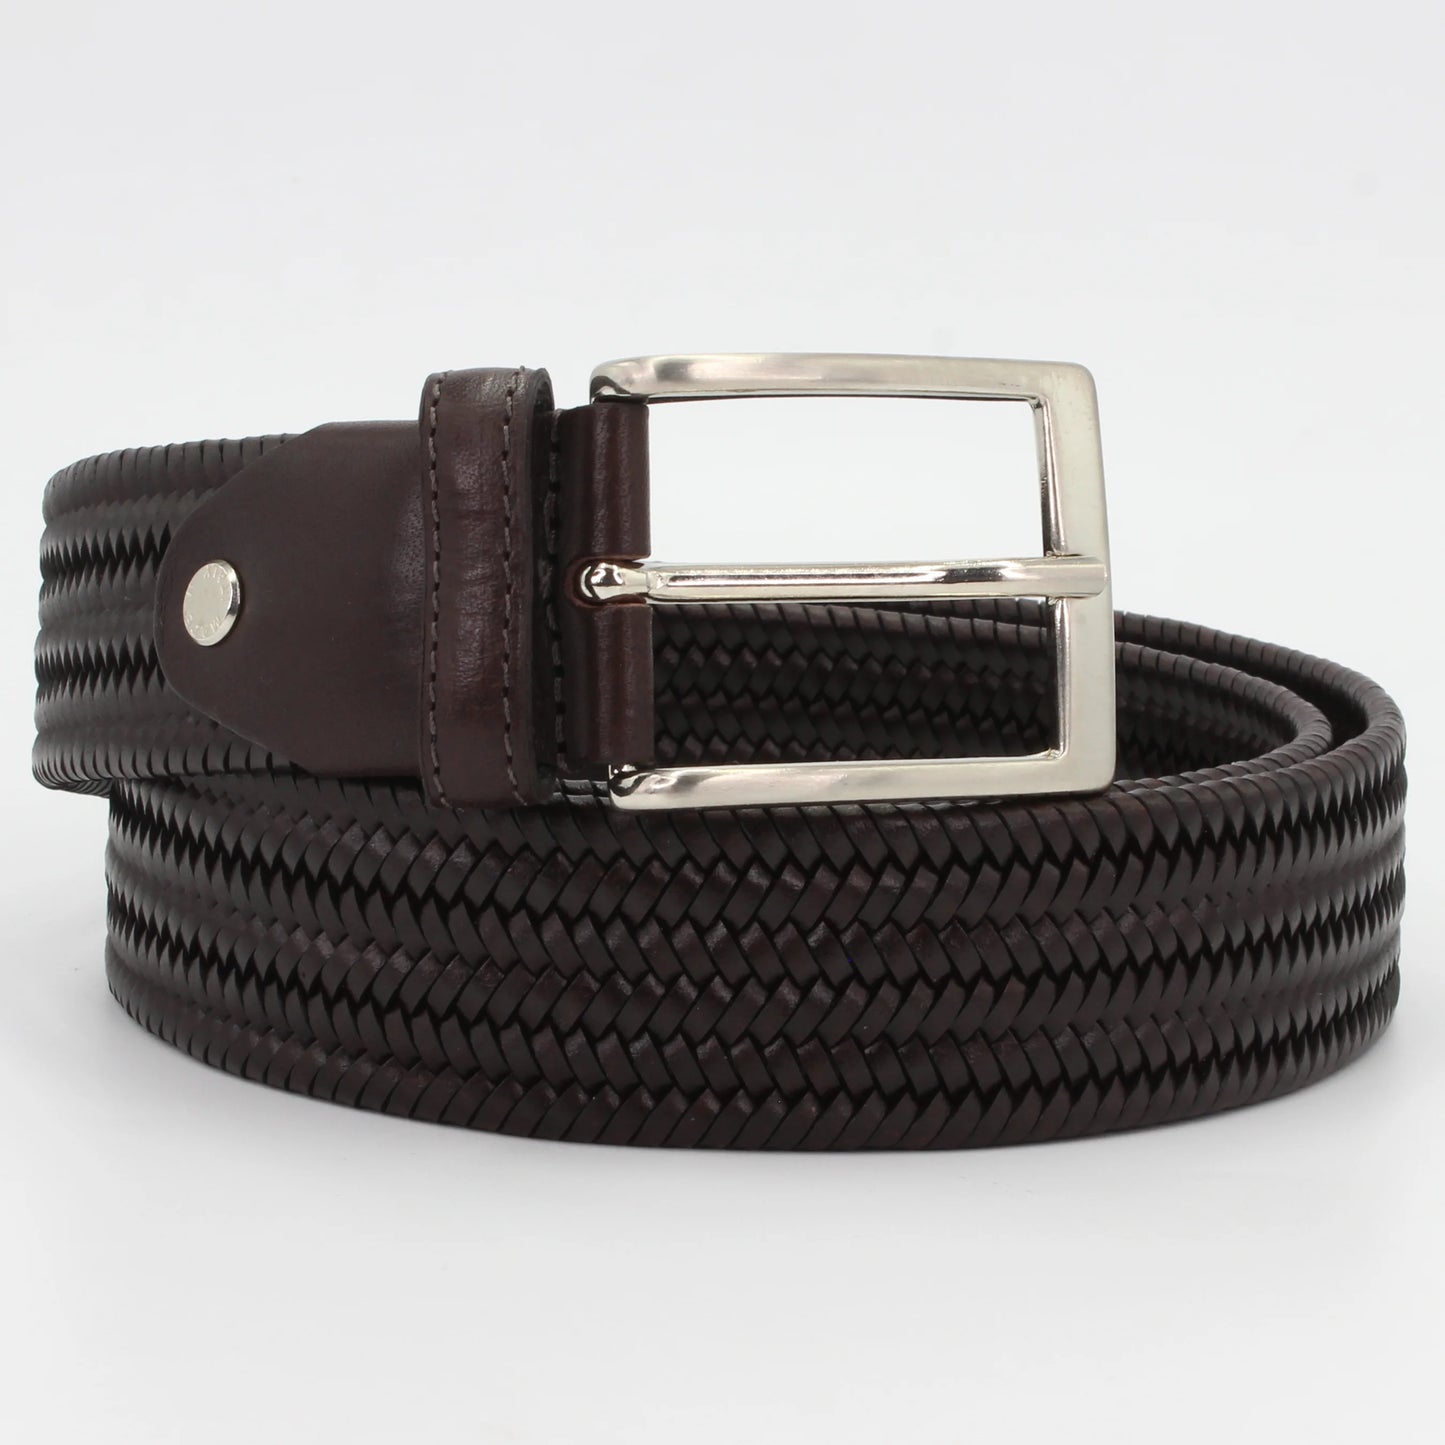 Shop our Italian-made Cuoieria Fiorentina woven Italian leather belt in testa di moro (CIODGEL00G000) or browse our range of Italian belts for men & women in-store at Aliverti Cape Town, or shop online.   We deliver in South Africa & offer multiple payment plans as well as accept multiple safe & secure payment methods.